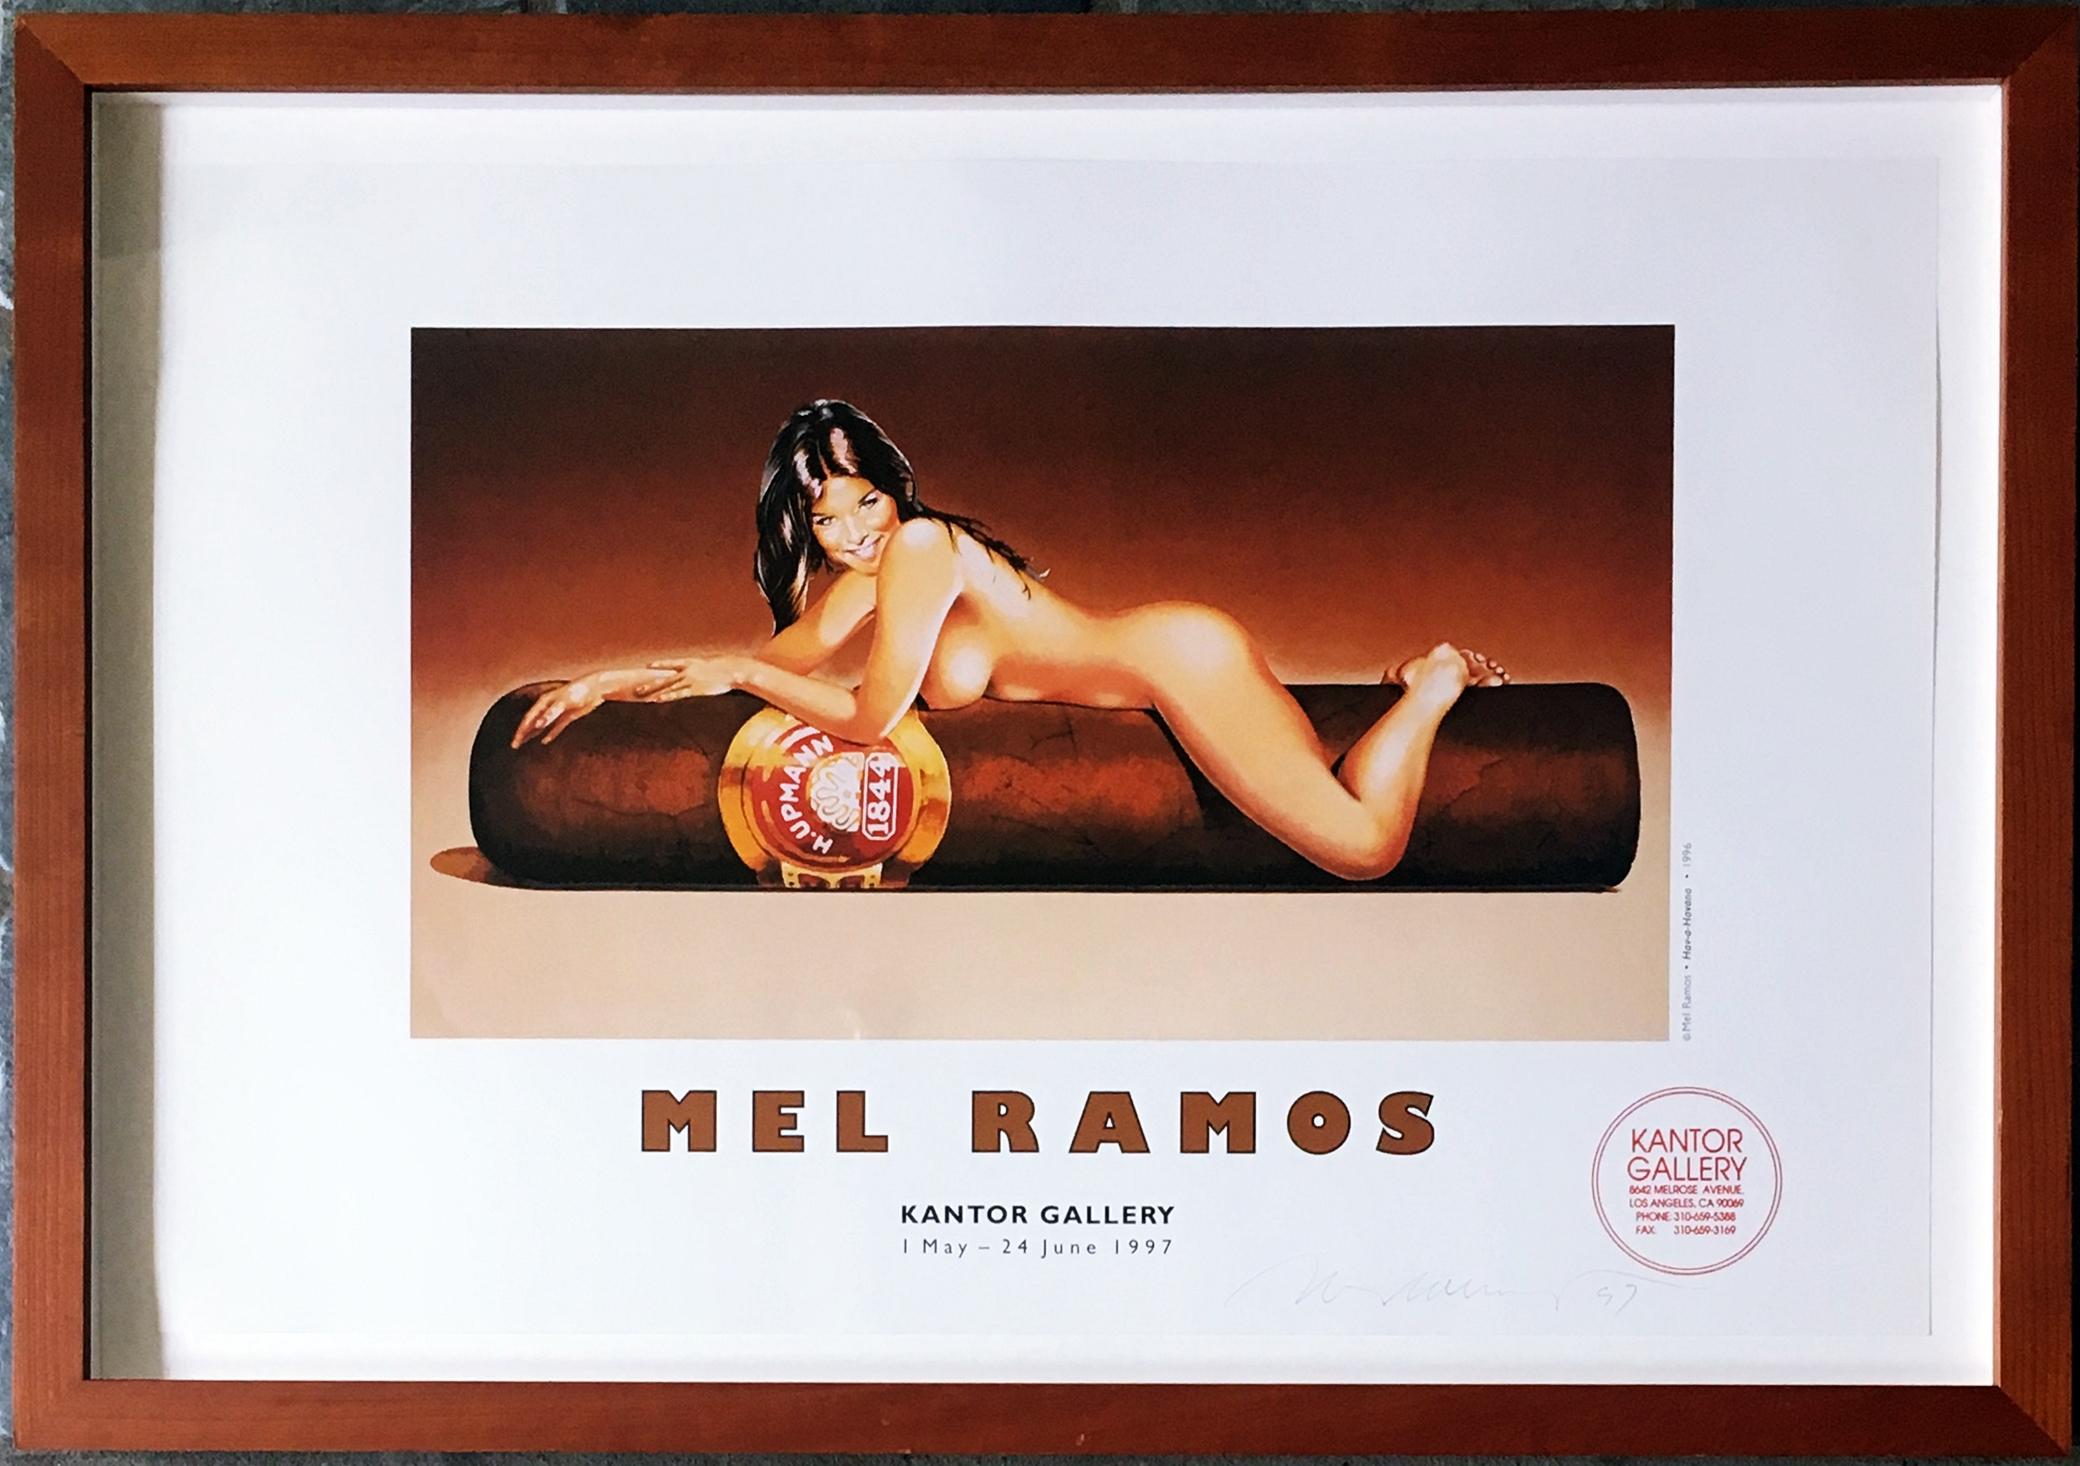 Mel Ramos at Kantor Gallery (Hand Signed), 1997
Limited Edition Offset Lithograph (hand signed by Mel Ramos)
Pencil signed and dated on lower front
Frame Included: framed in dark wood frame with UV plexi
This terrific limited edition offset